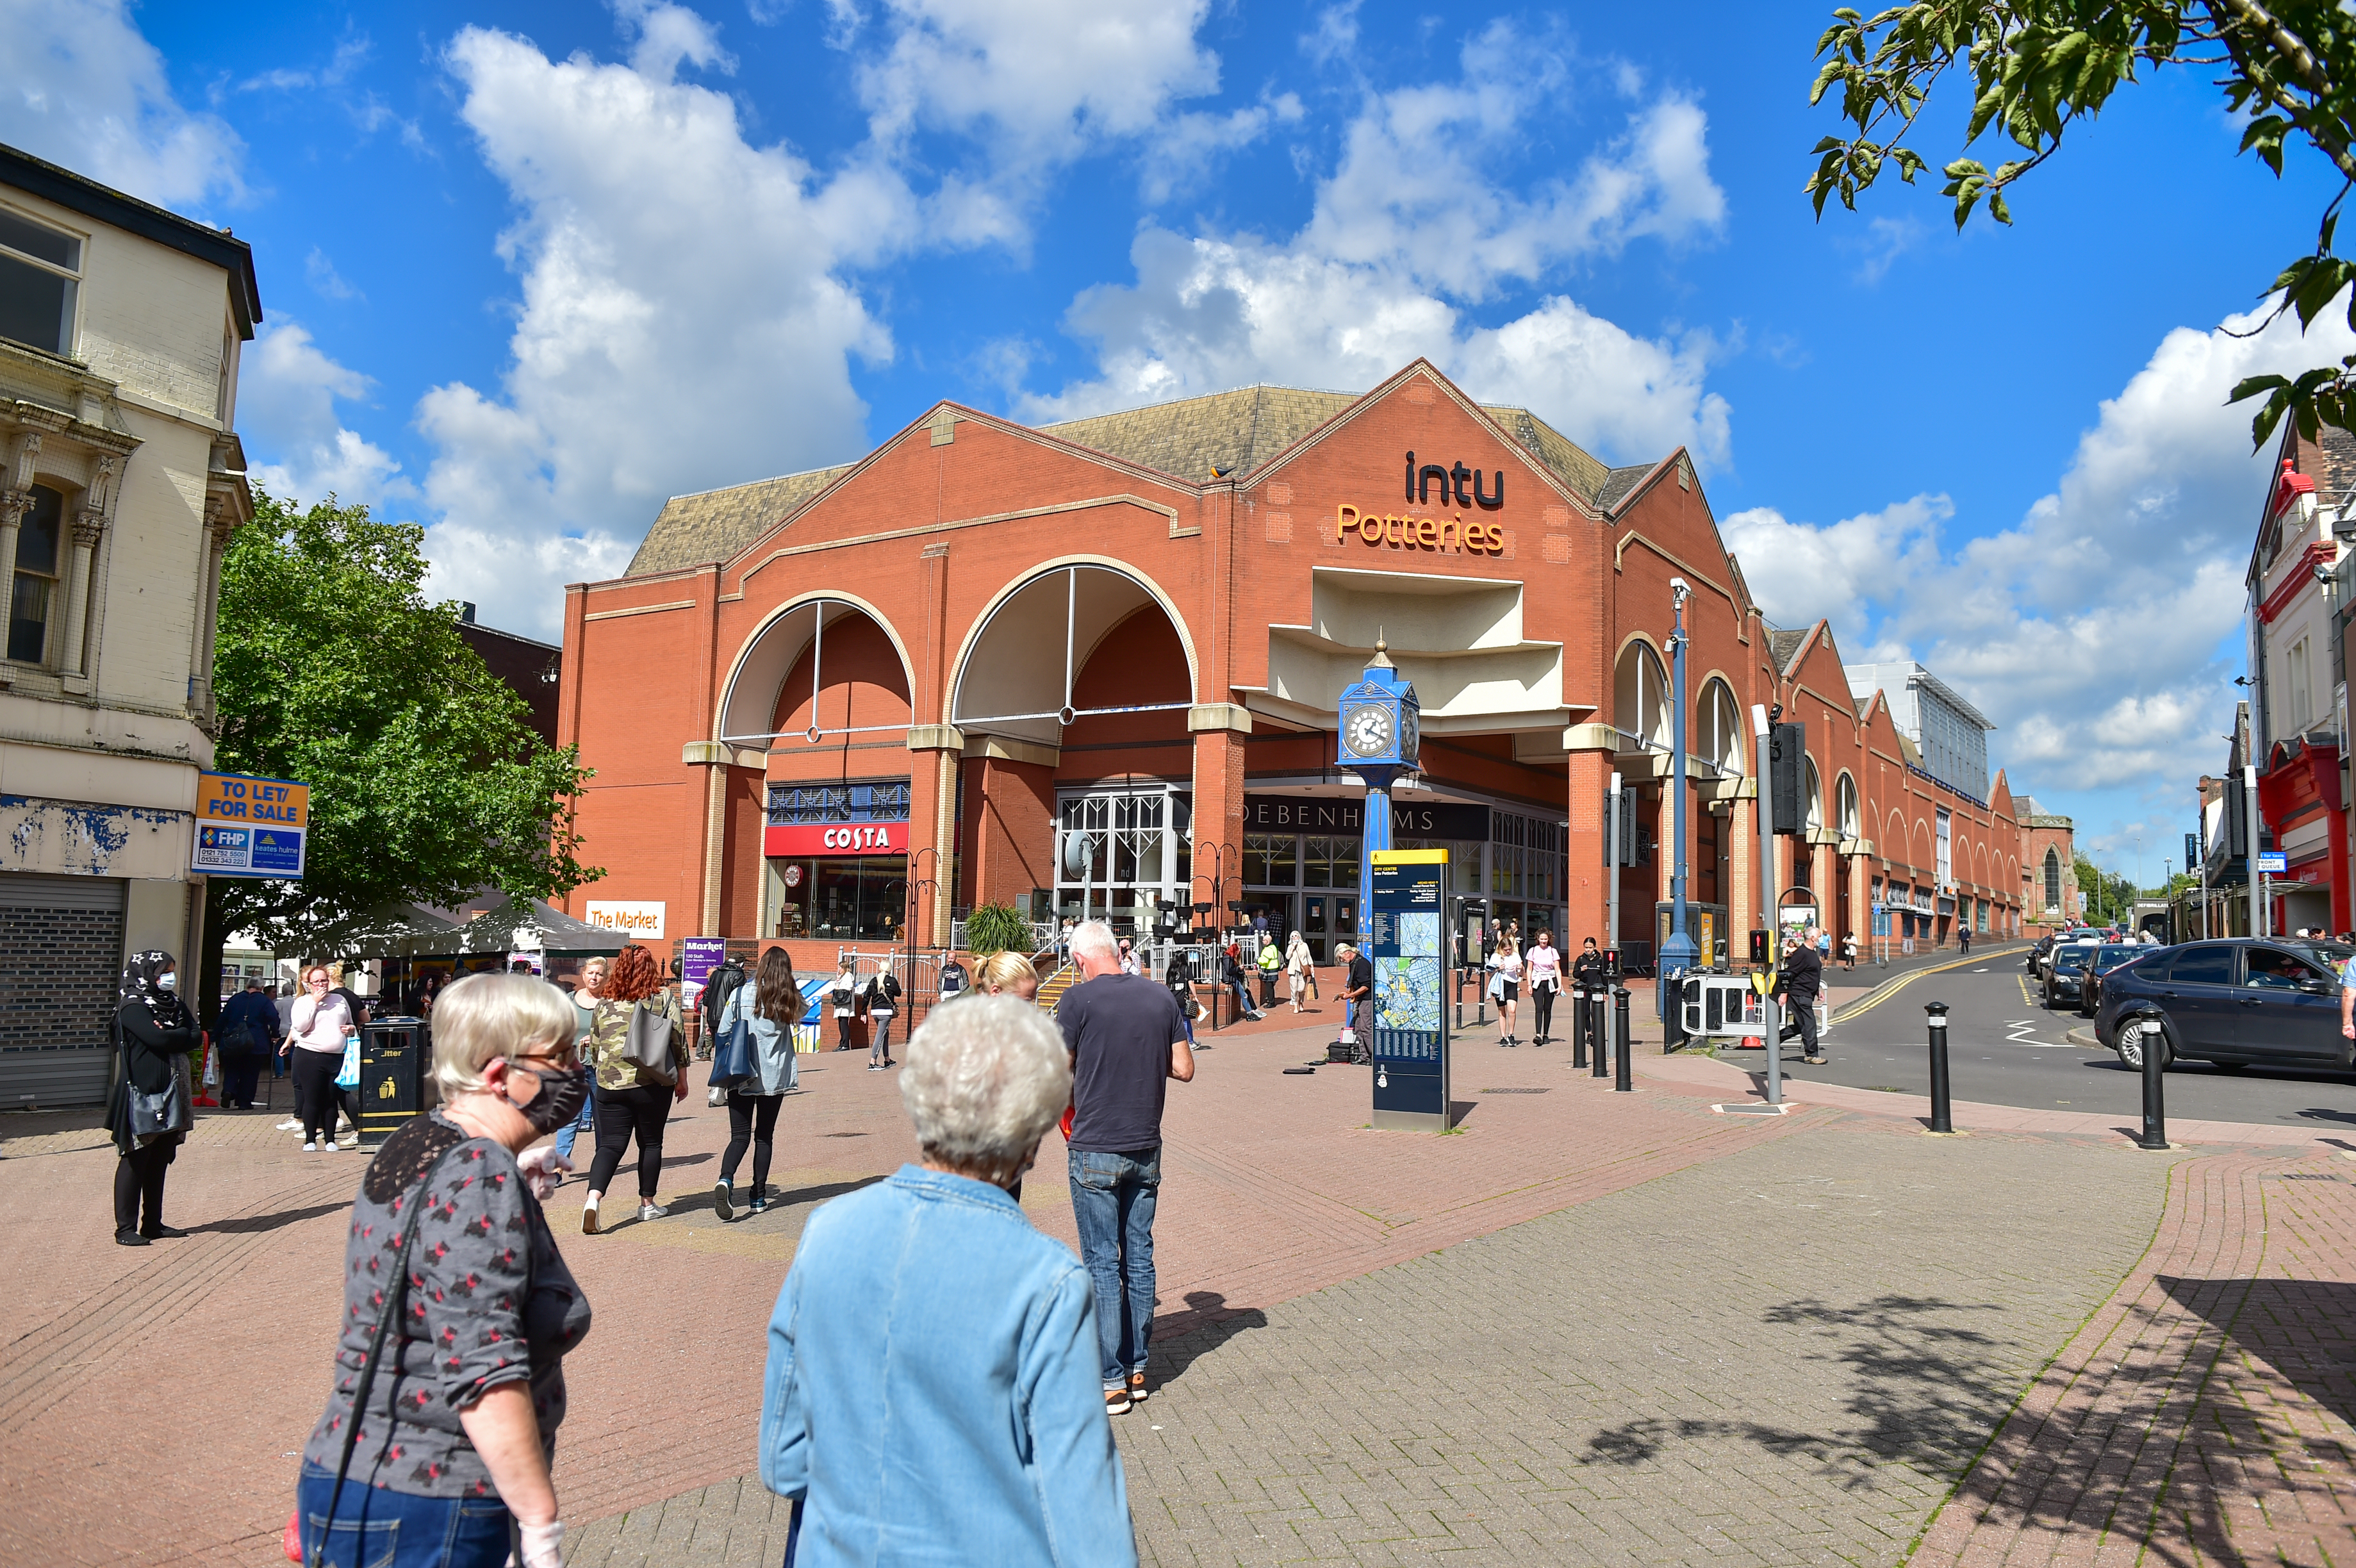 The Potteries Centre, Stoke-on-Trent (formerly Intu Potteries)